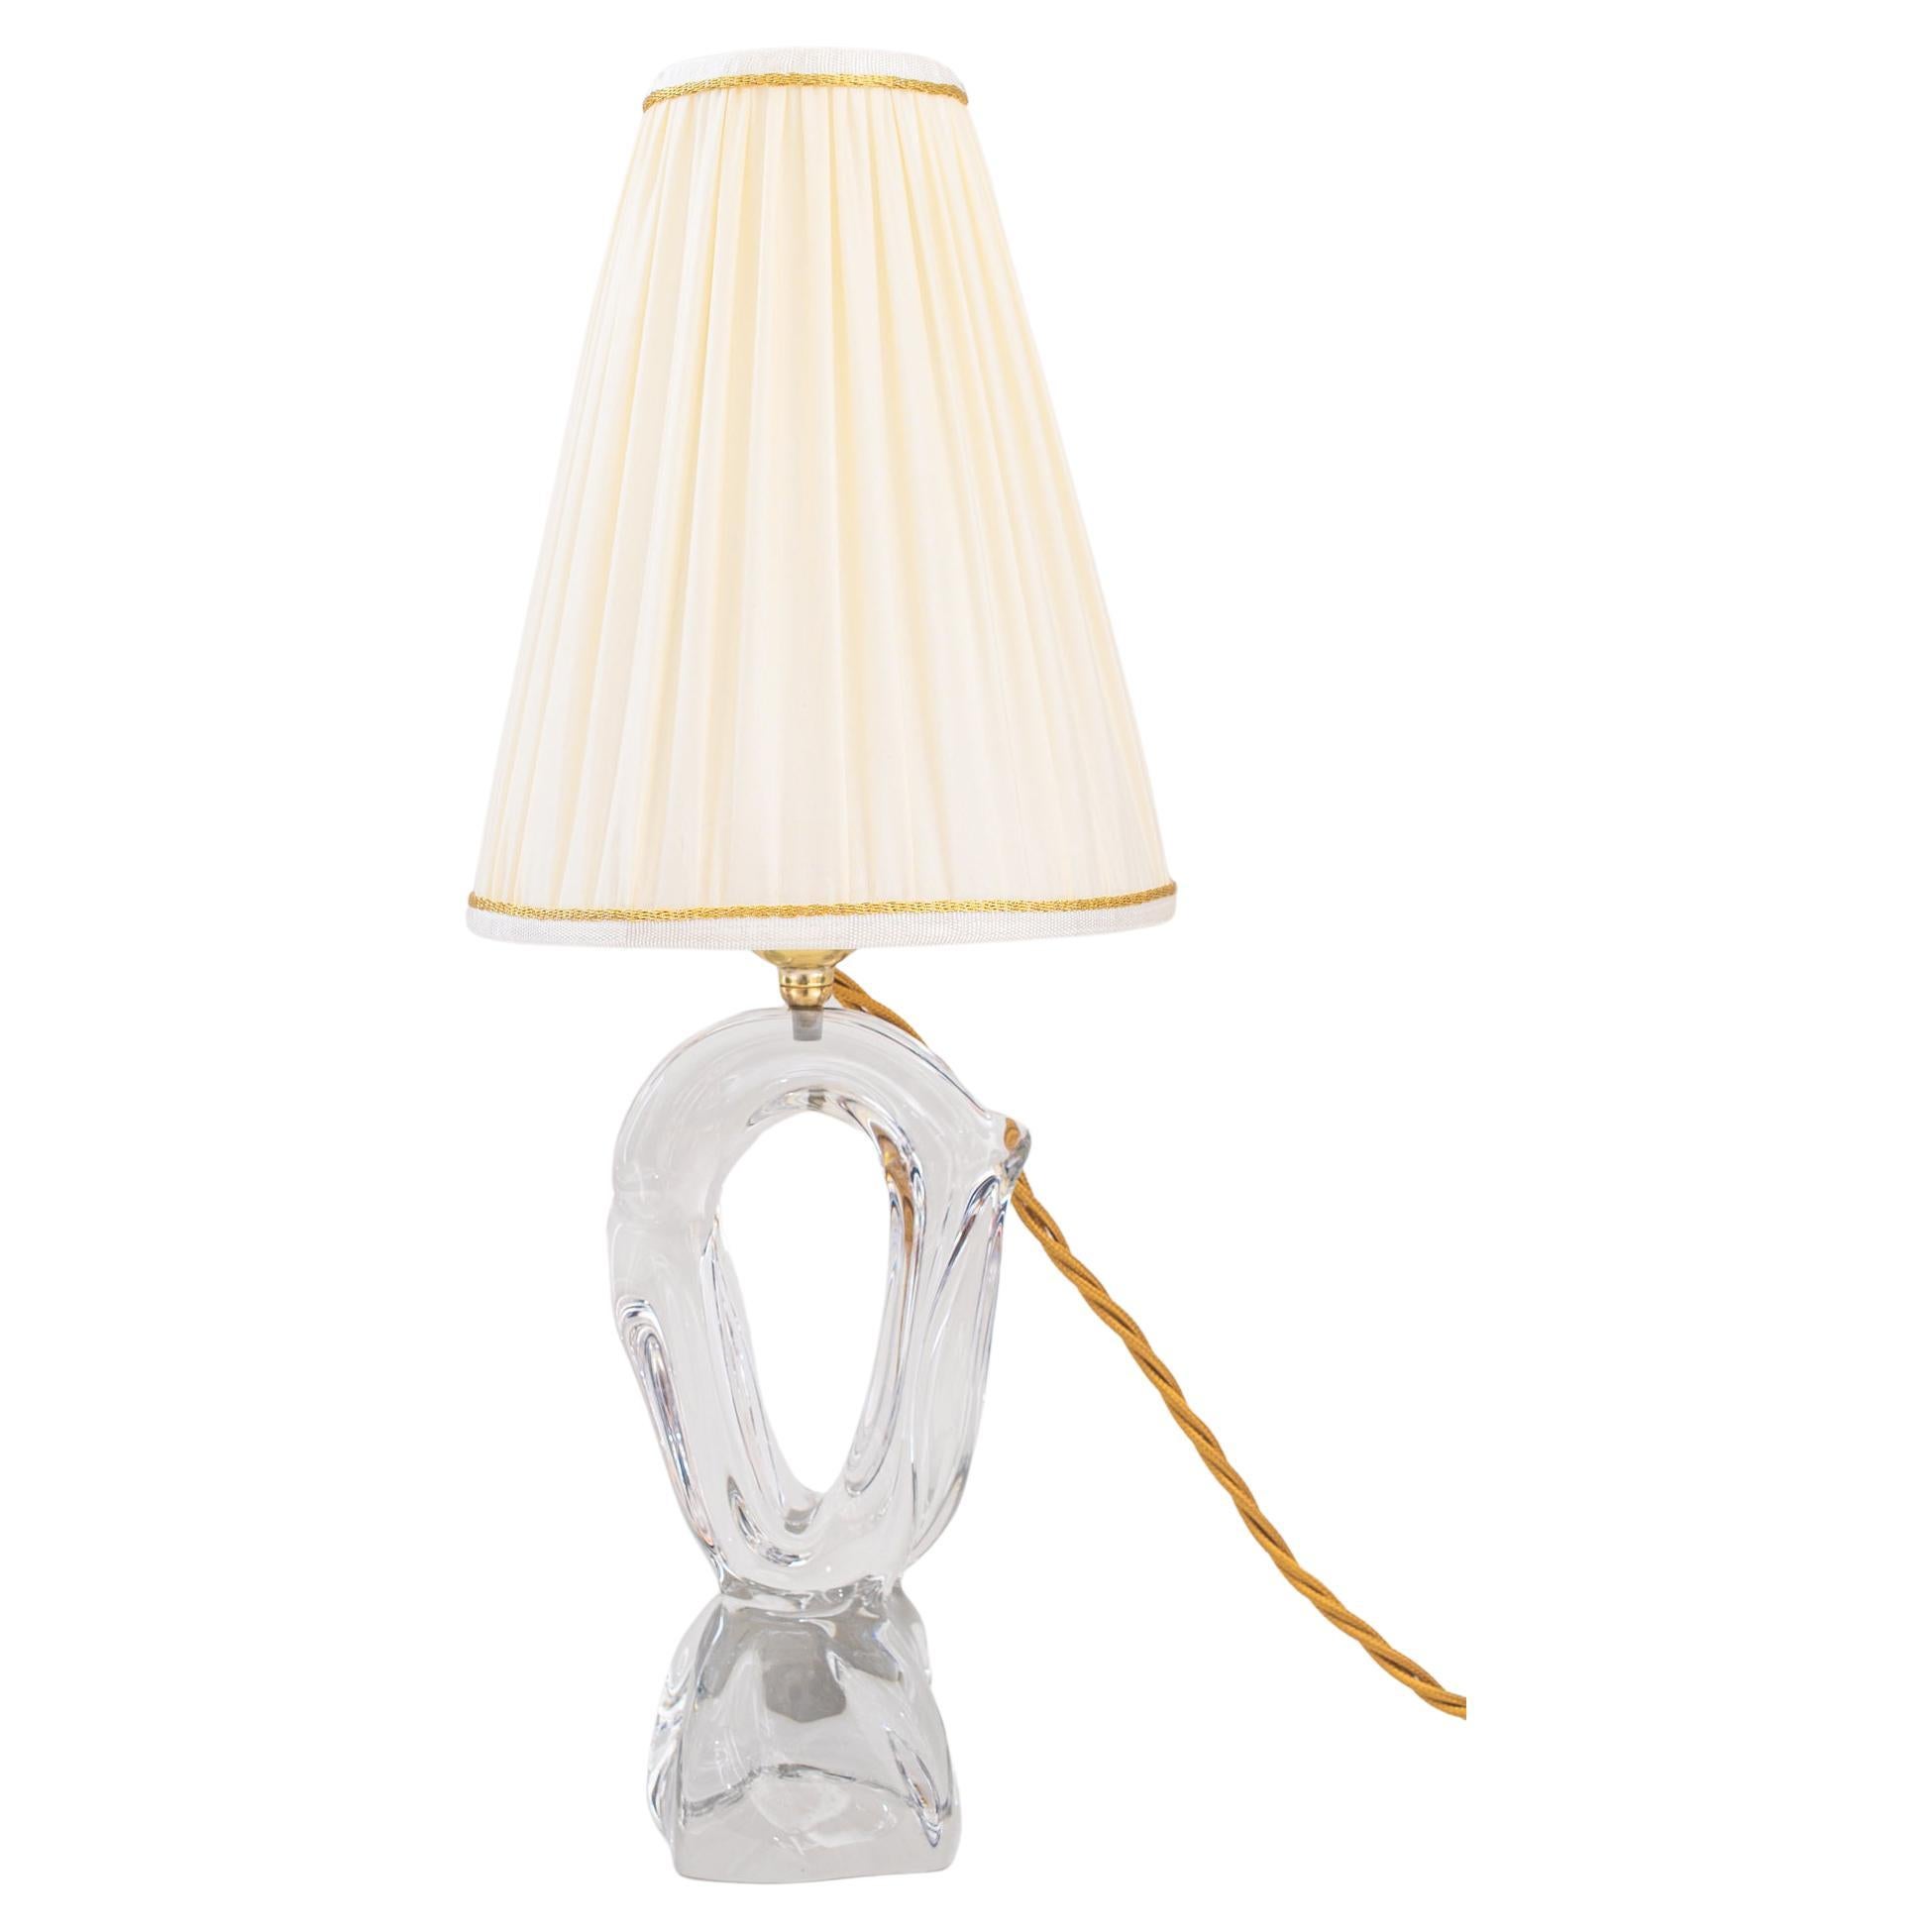 French Daum Crystal Glass Table Lamp, around 1960s ' Signed ' For Sale